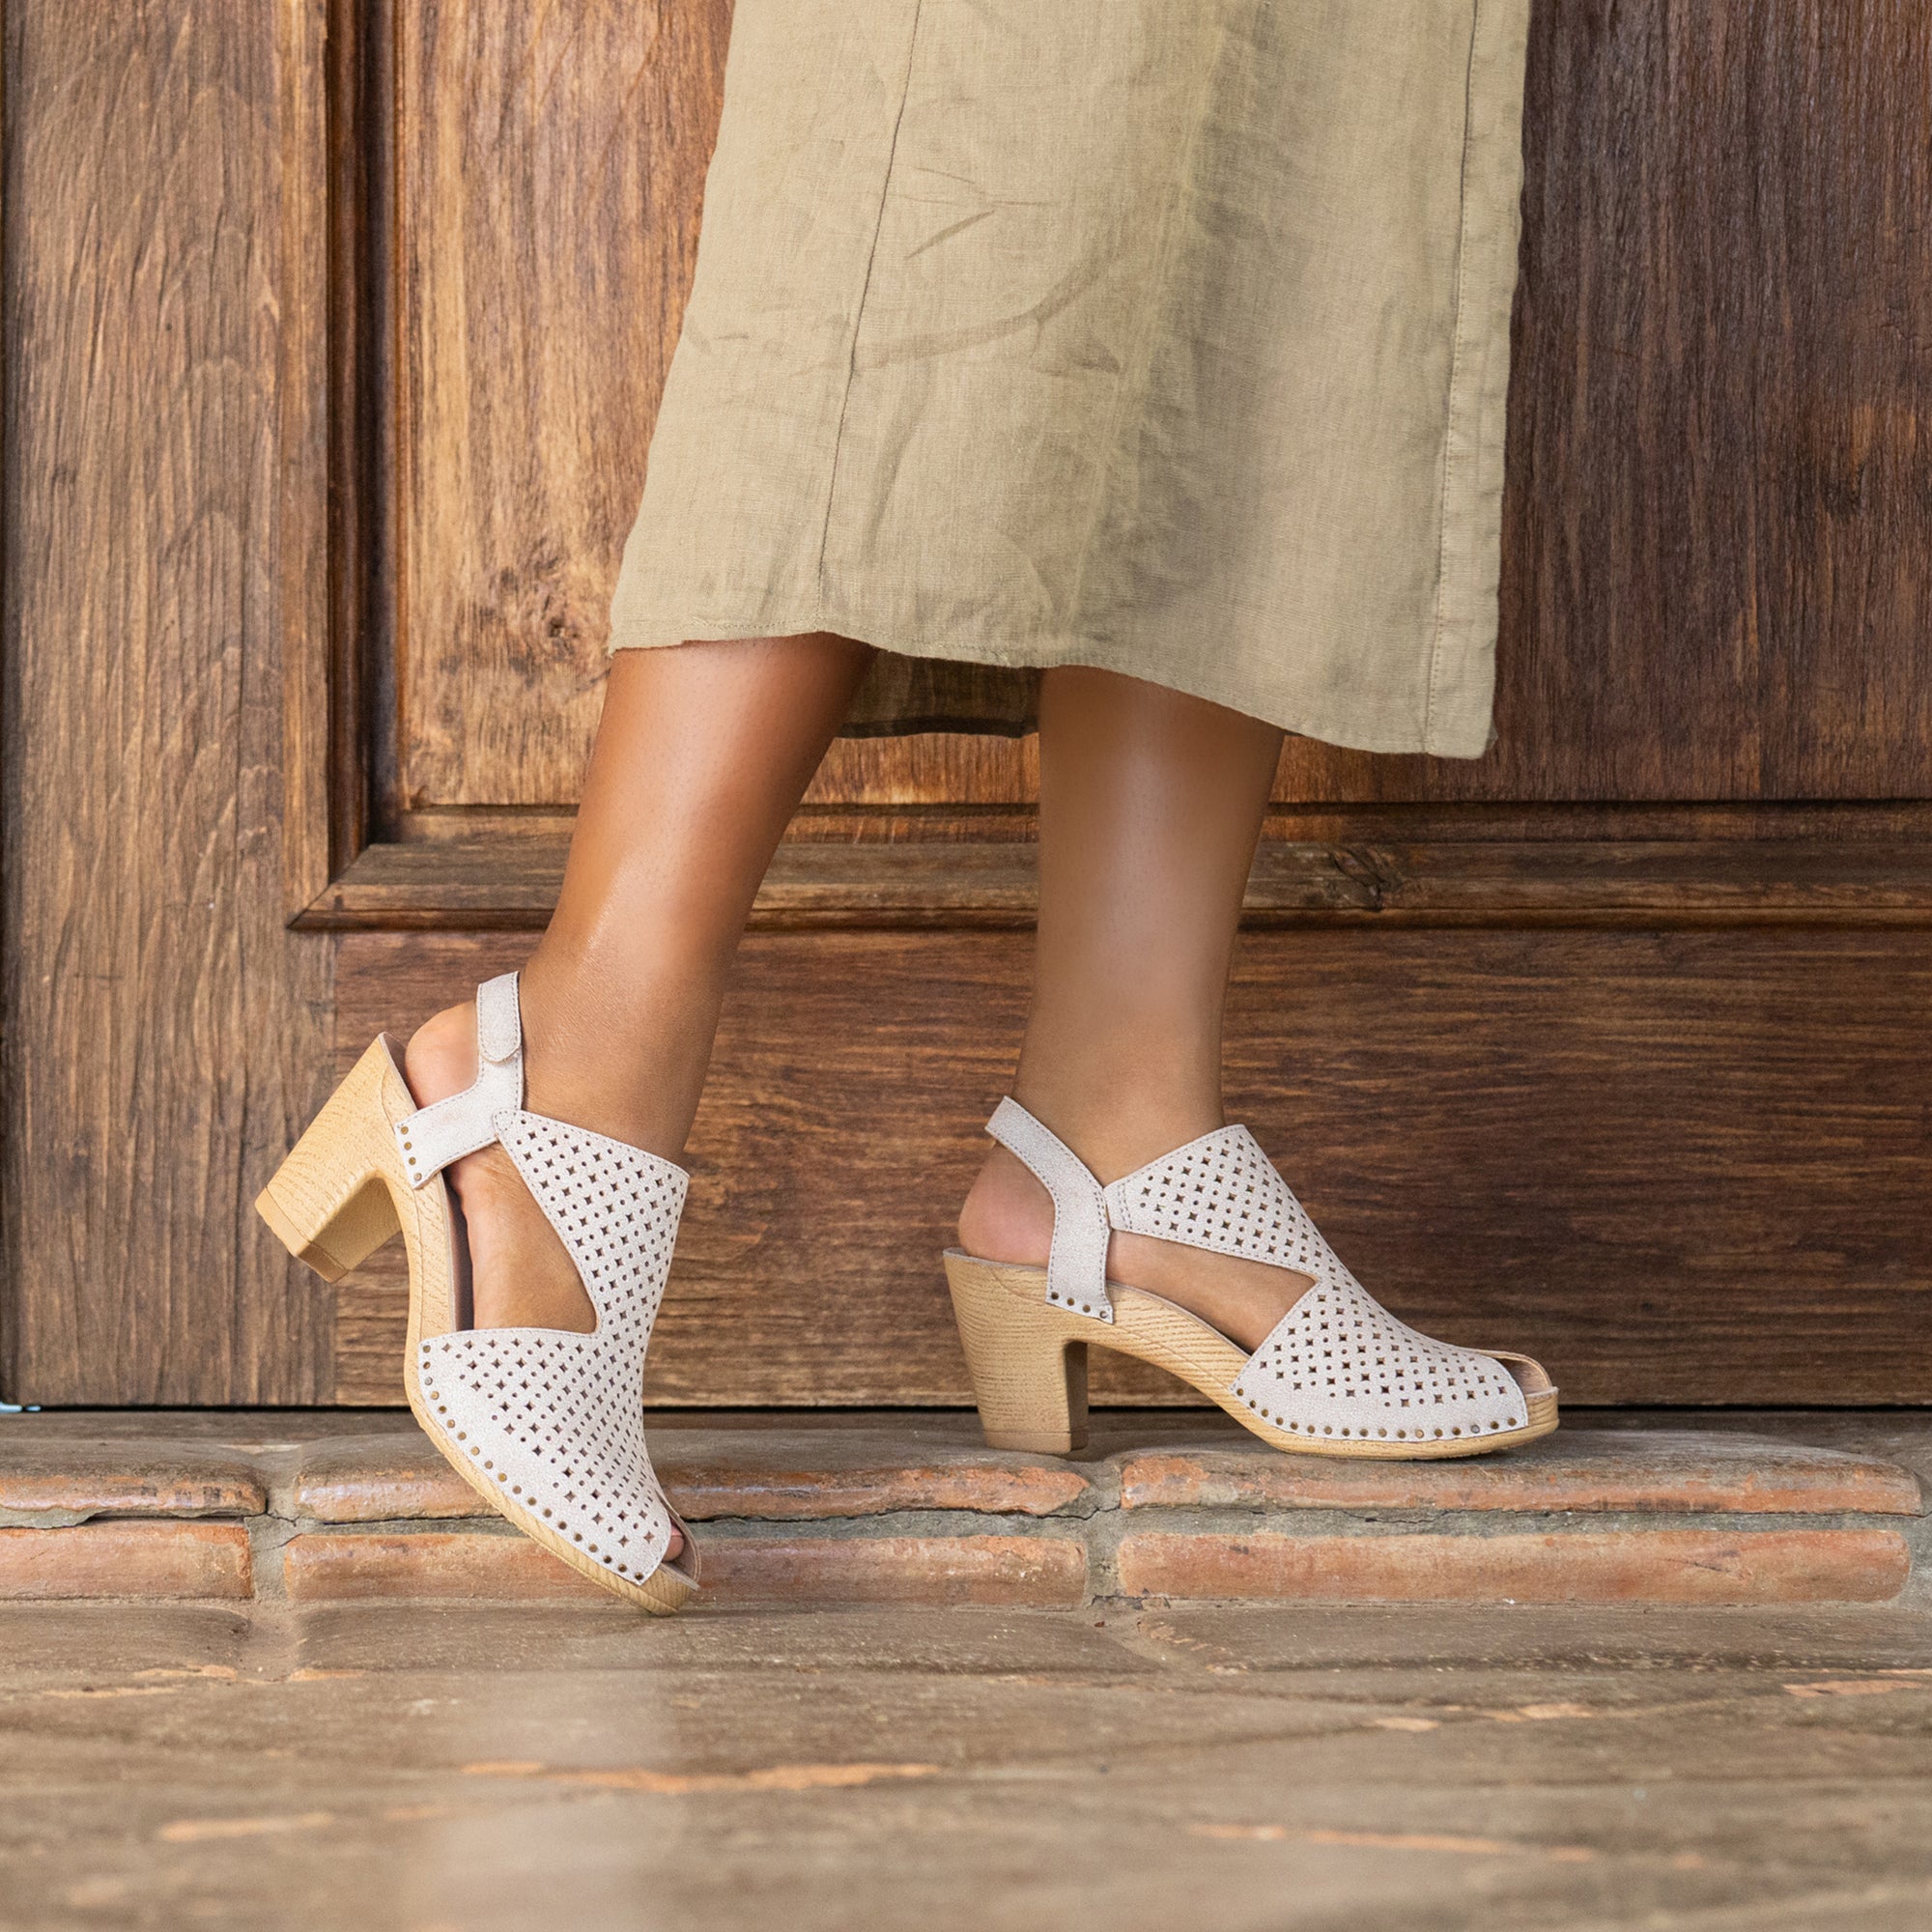 White heeled sandals with a peep toe construction and cutout design on the leather uppers.